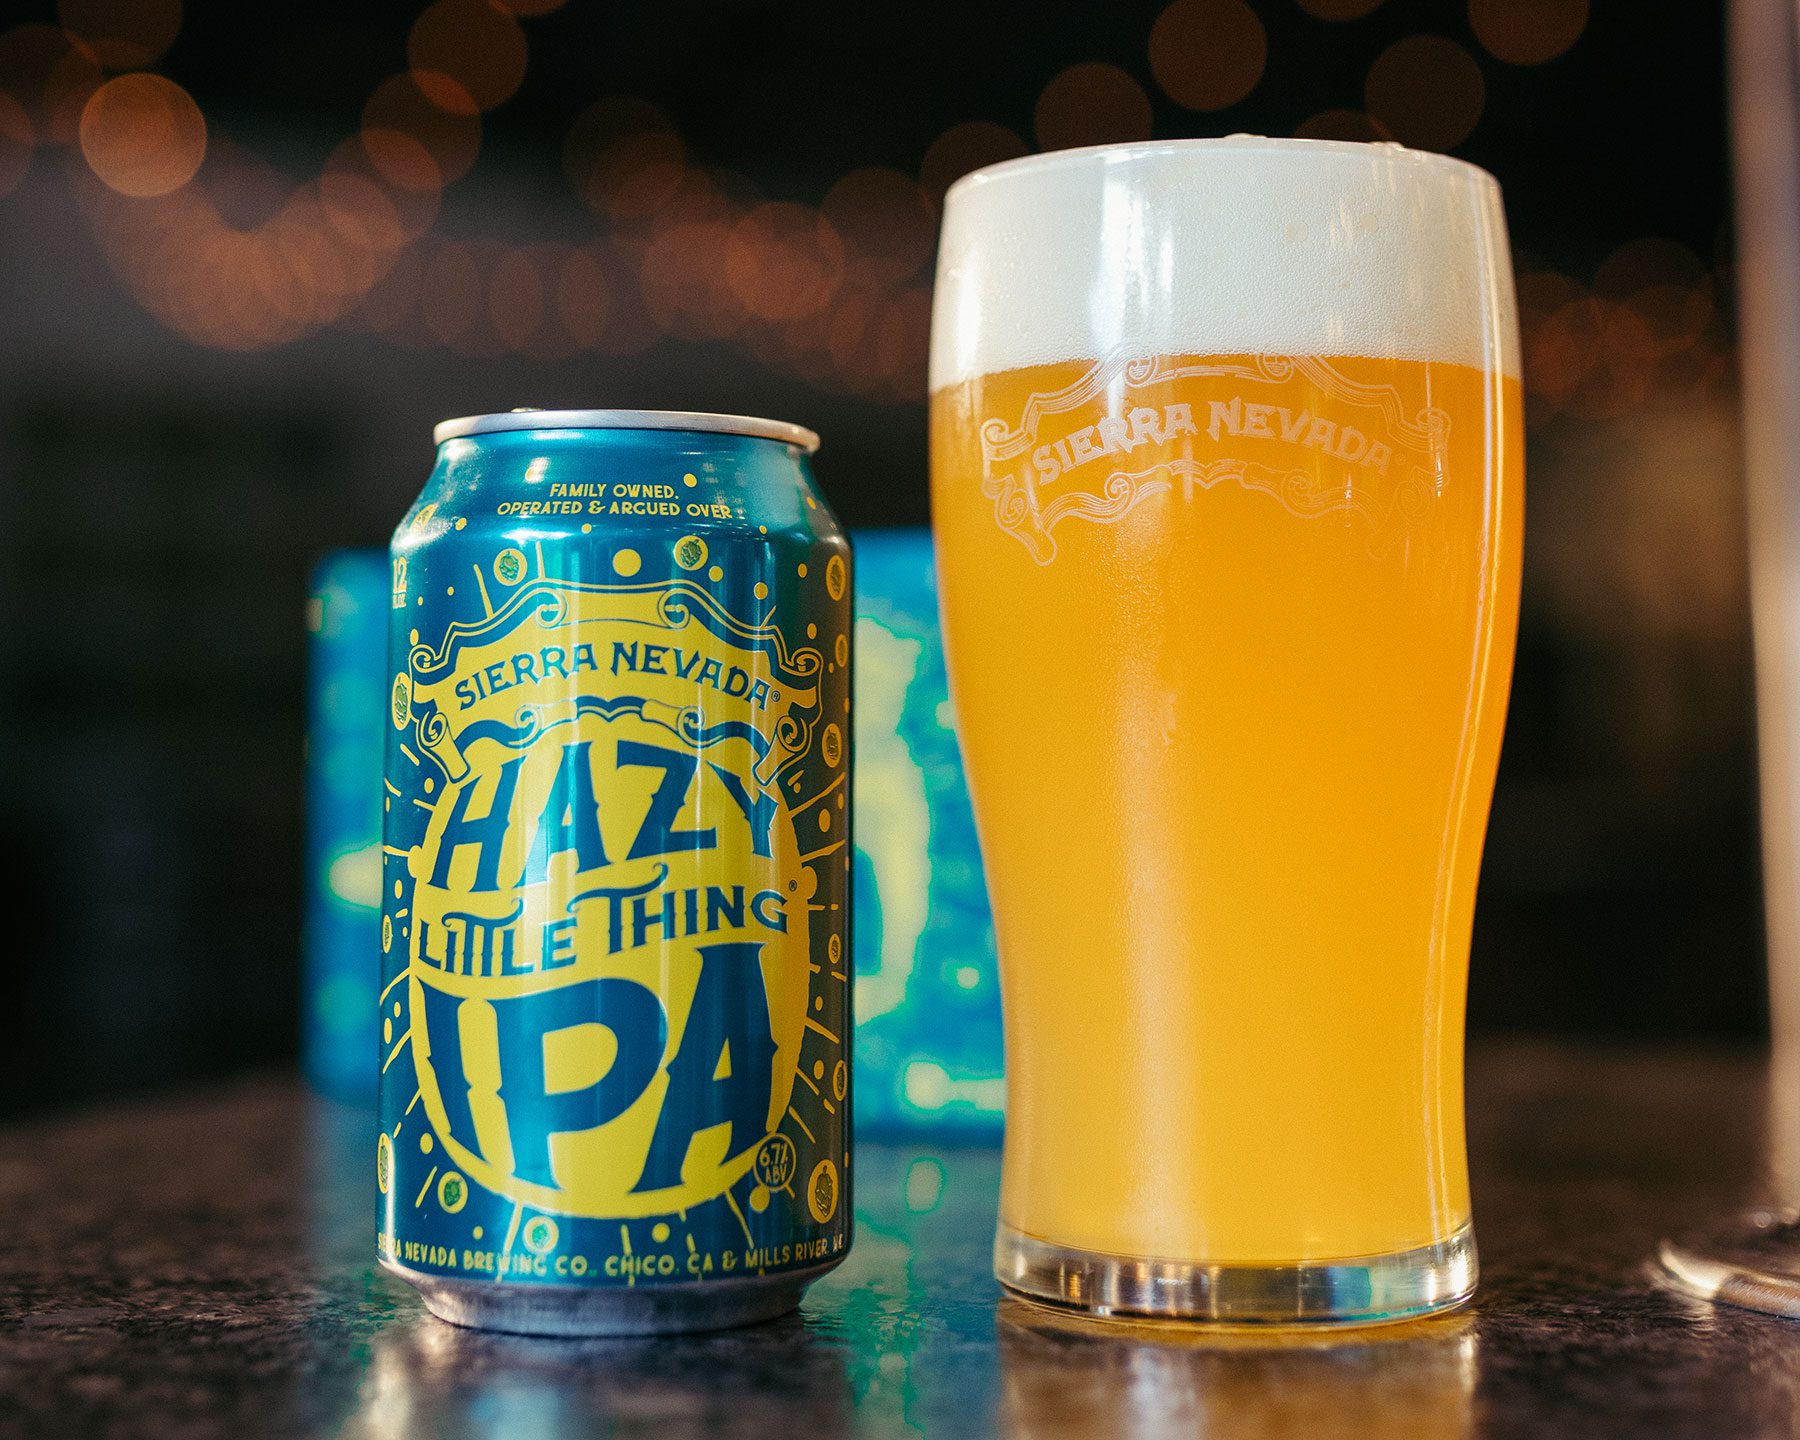 A can of Hazy Little Thing IPA next to a full pint glass